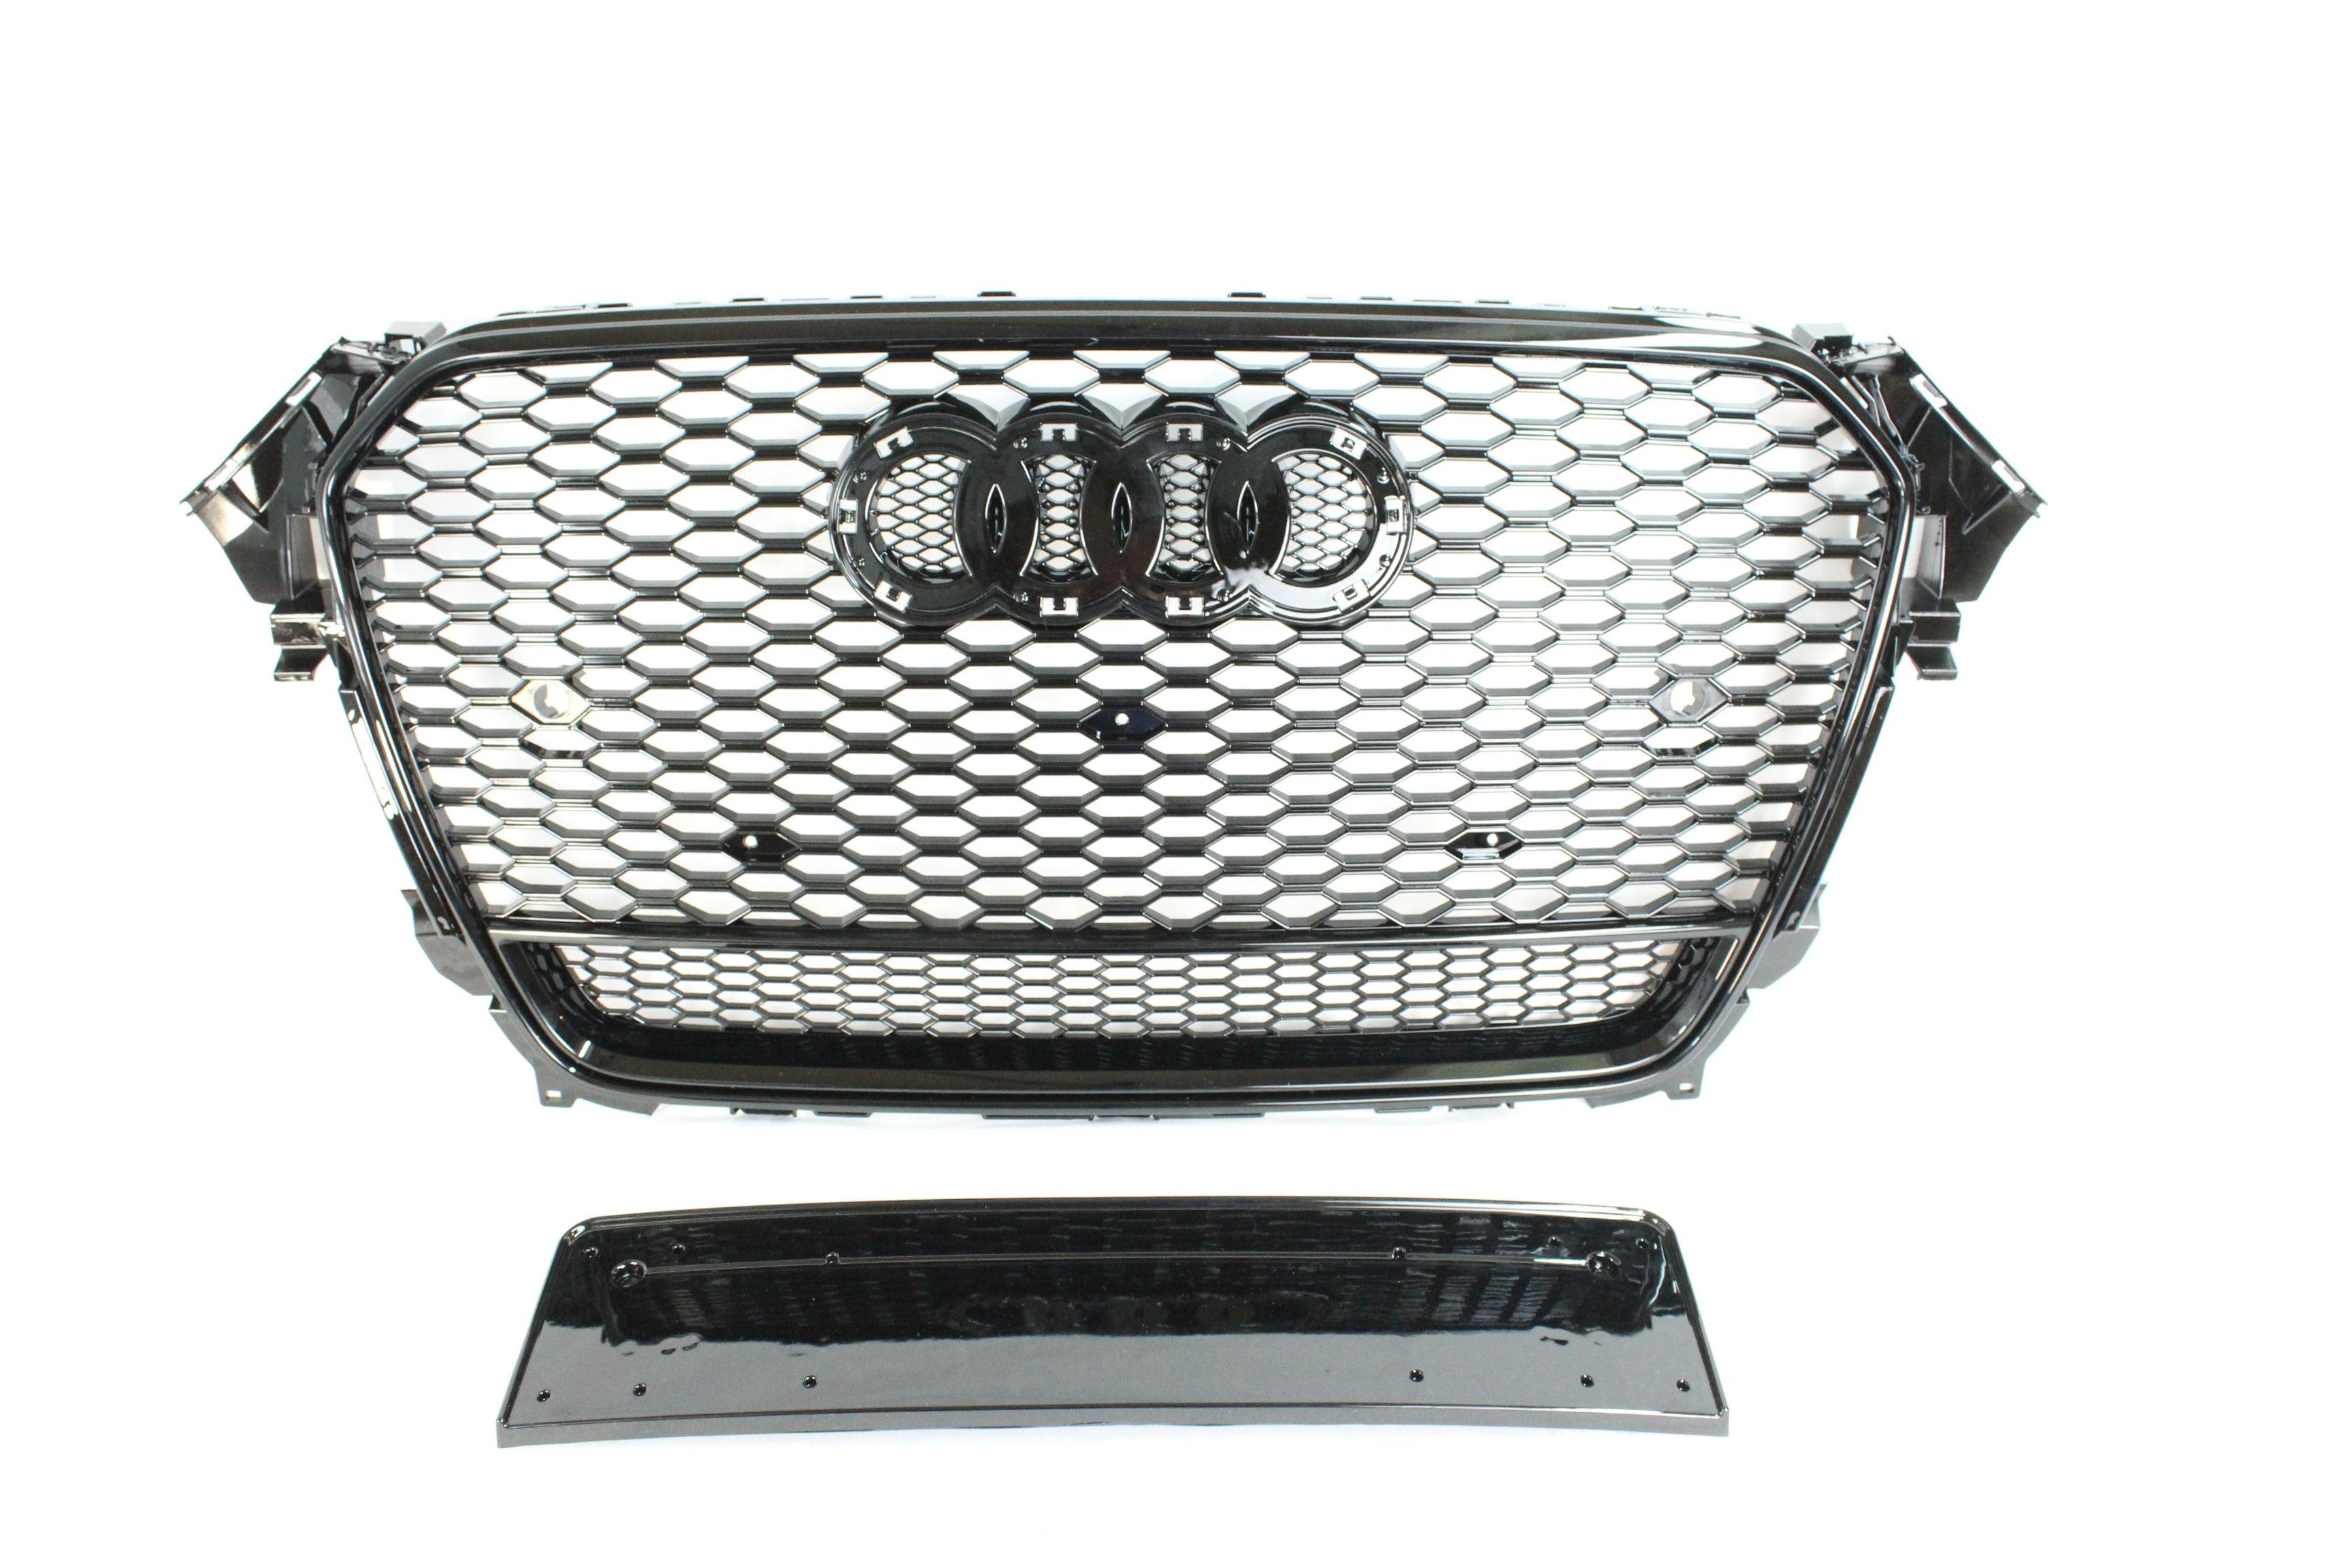 AUDI A4 S4 RS4 B8.5 2012-2016 ALL BLACK HONEYCOMB GRILL - BLAK BY CT CARBON - CT Carbon